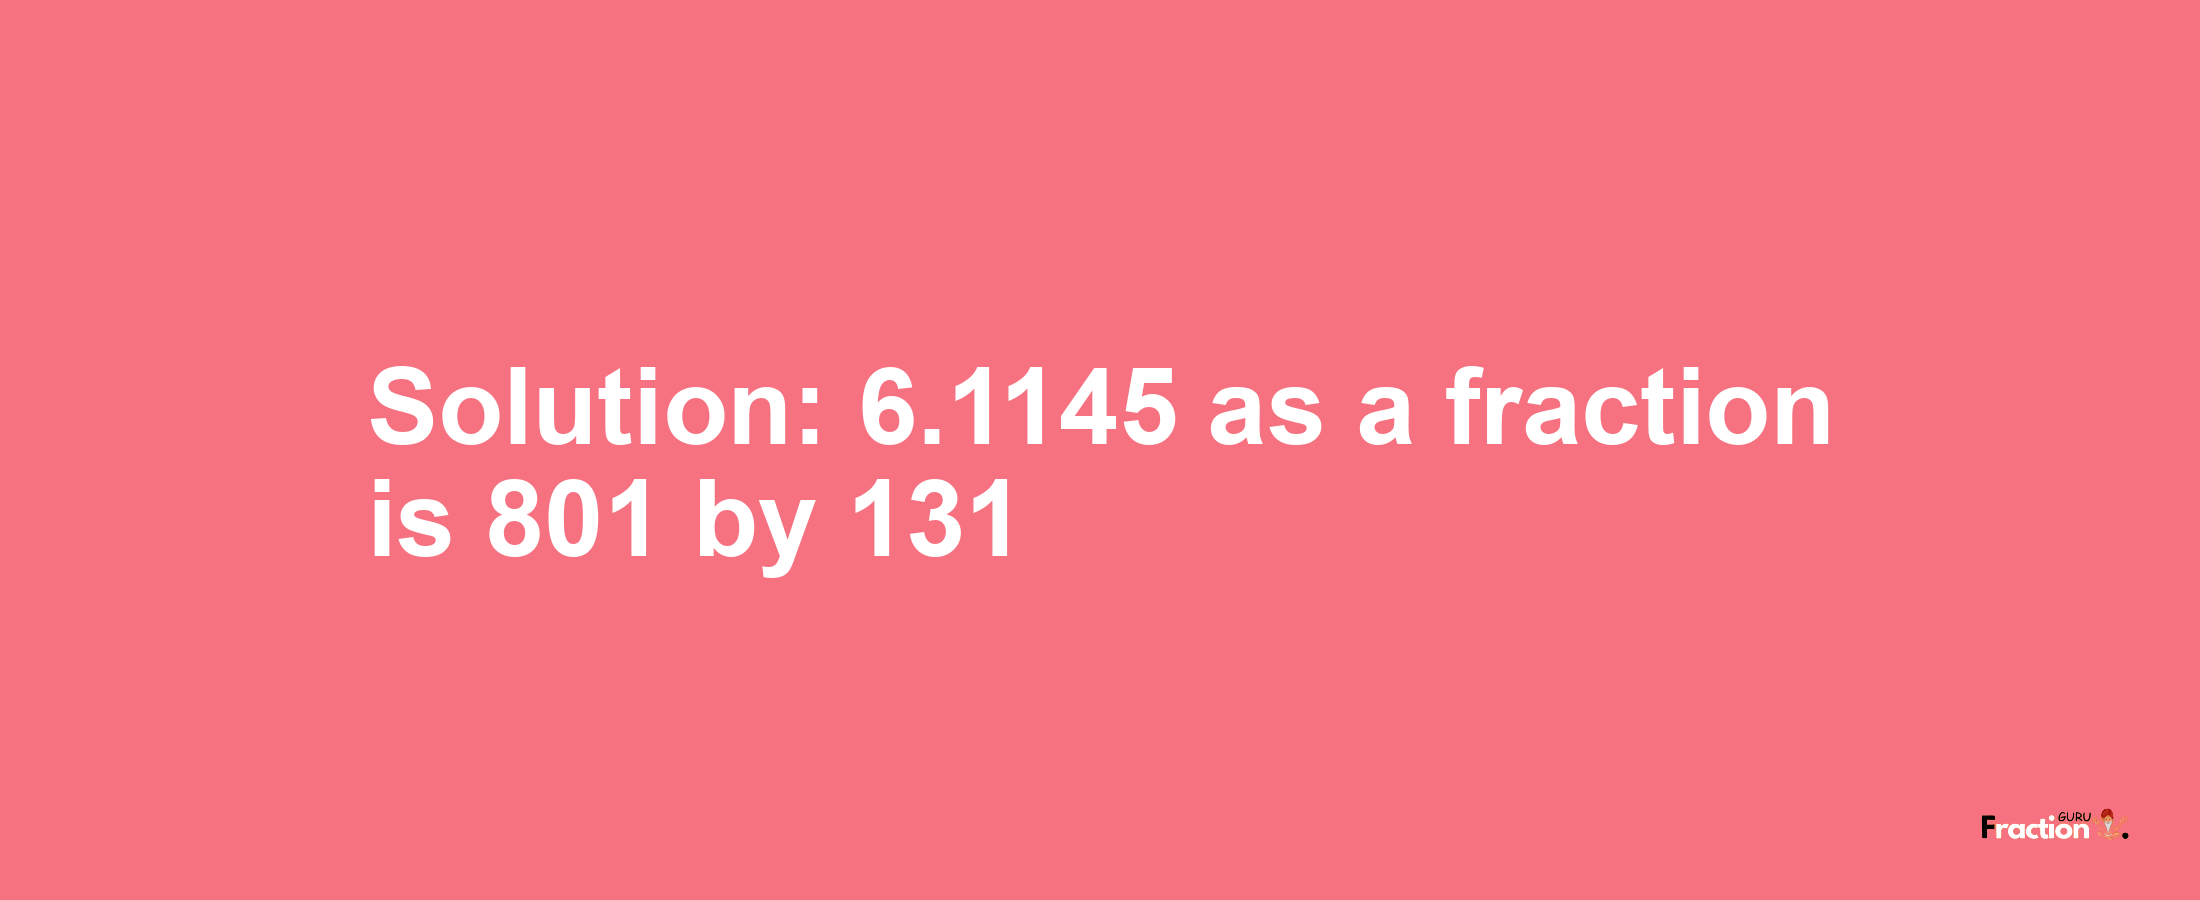 Solution:6.1145 as a fraction is 801/131